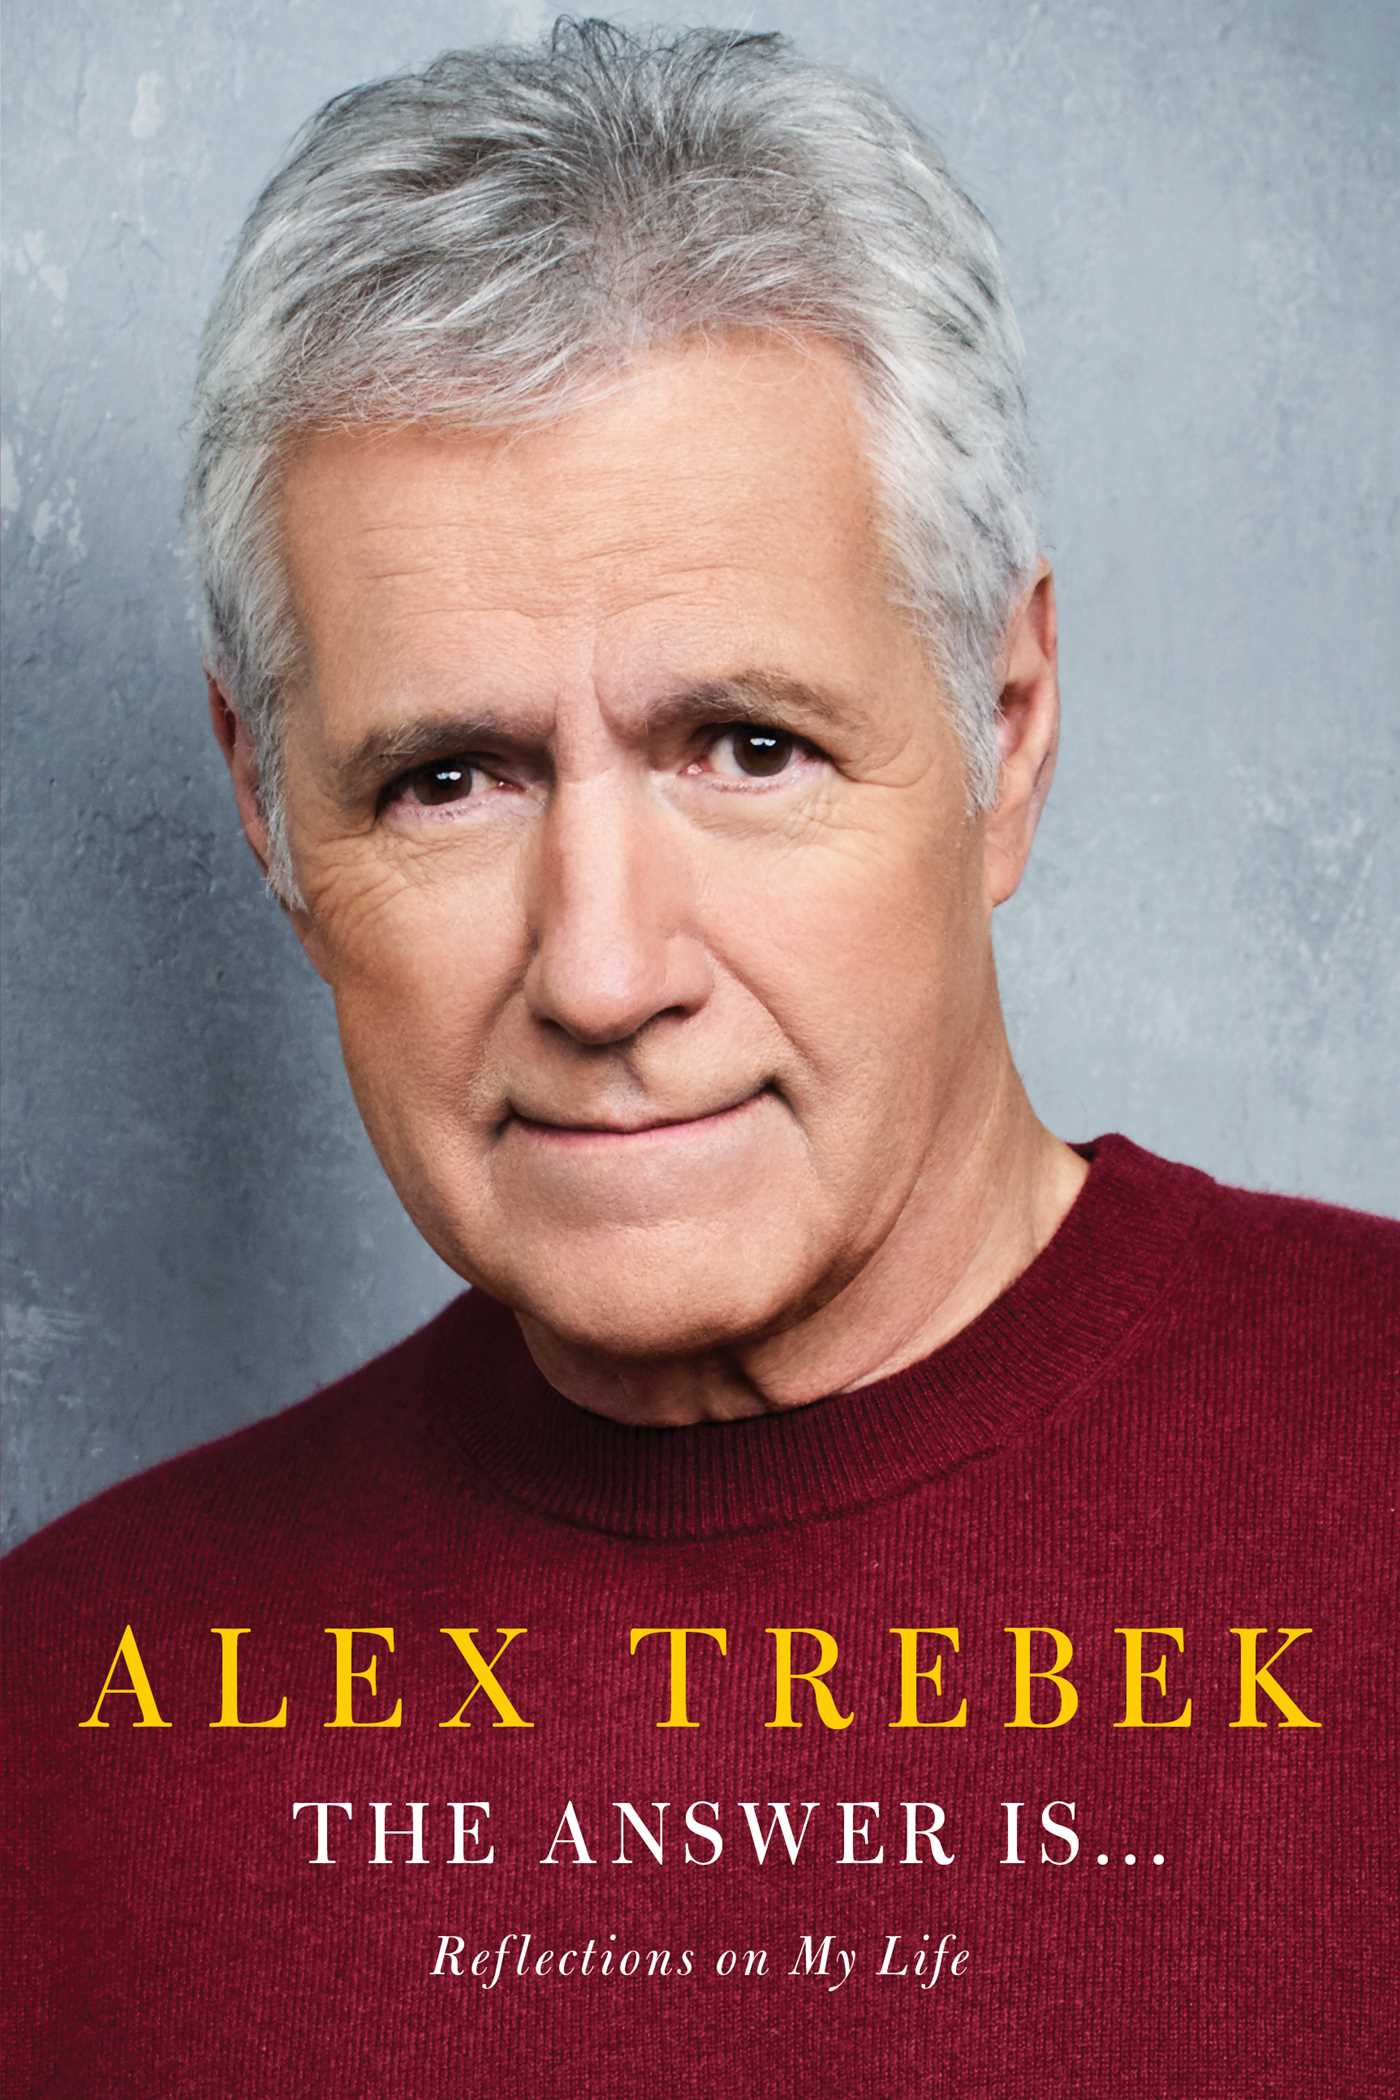 Alex Trebek is gray-haired but tidy, with a small smile and a direct gaze, over the all-caps name ALEX TREBEK and title 'The Answer Is...'